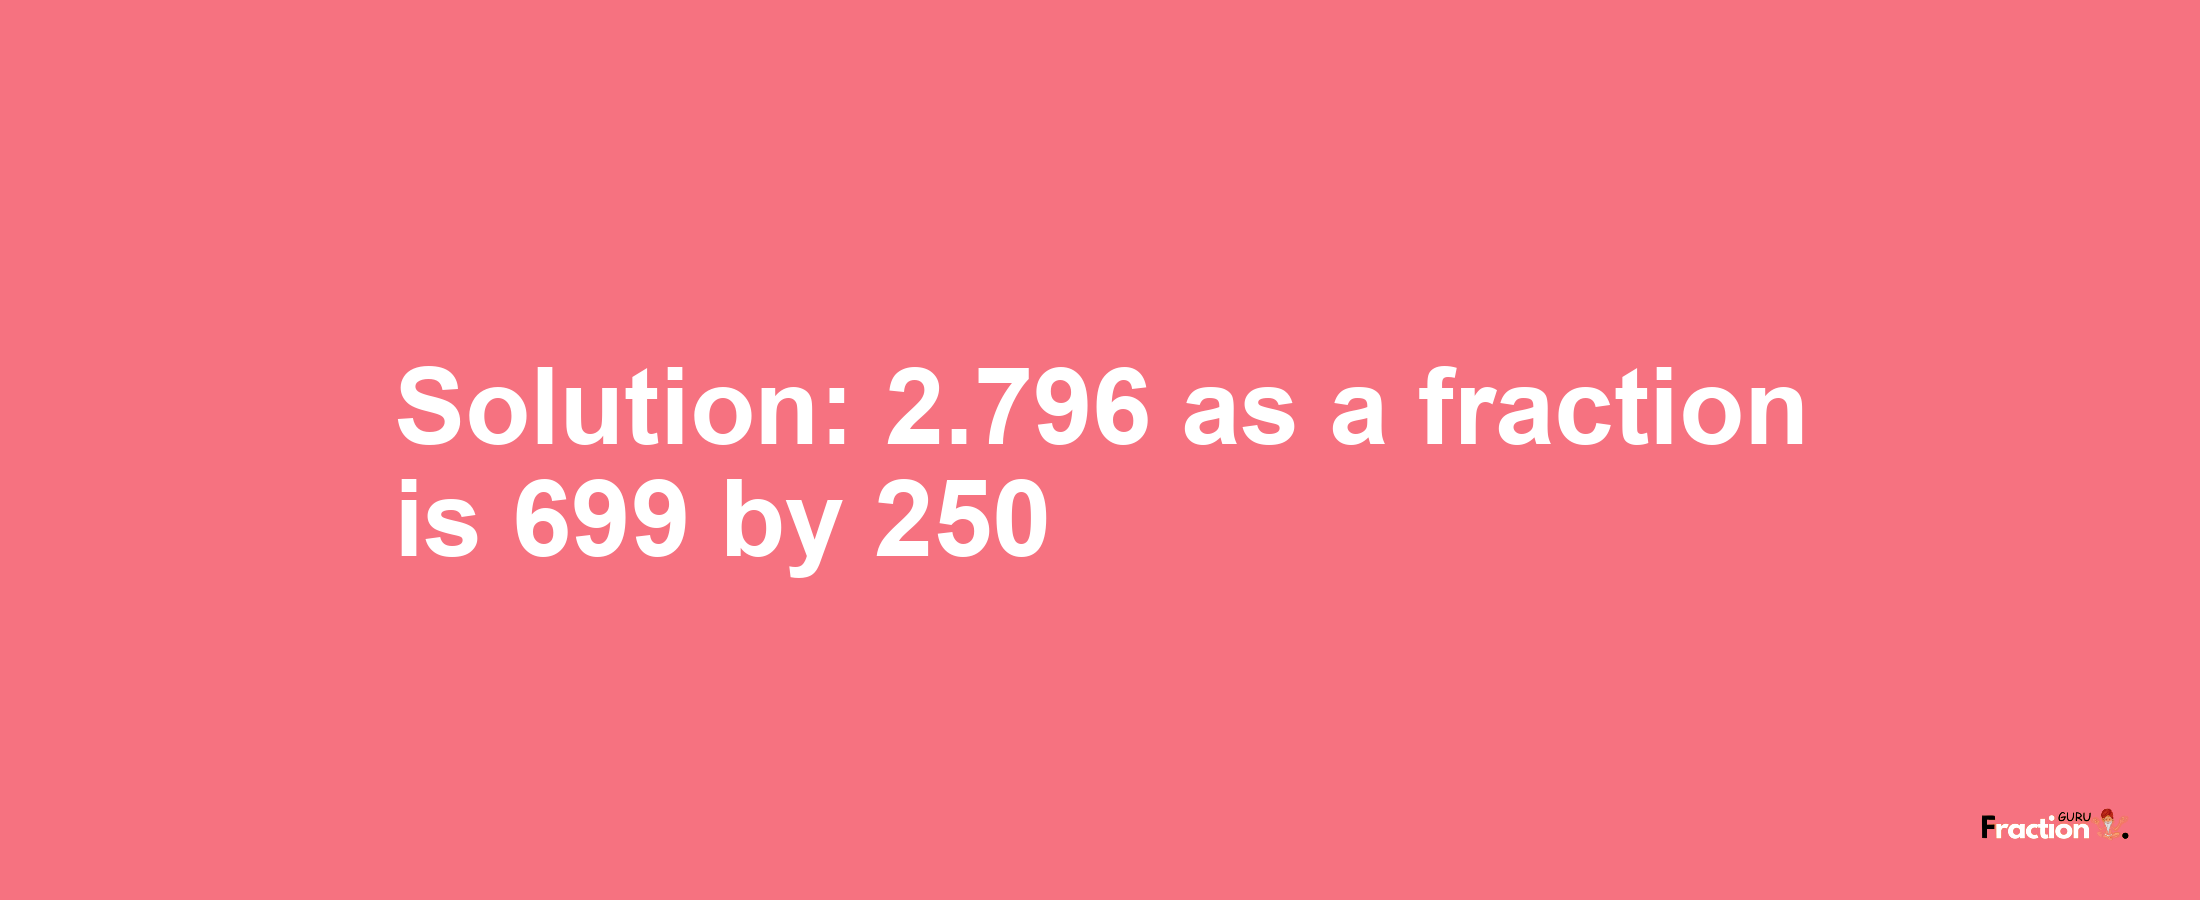 Solution:2.796 as a fraction is 699/250